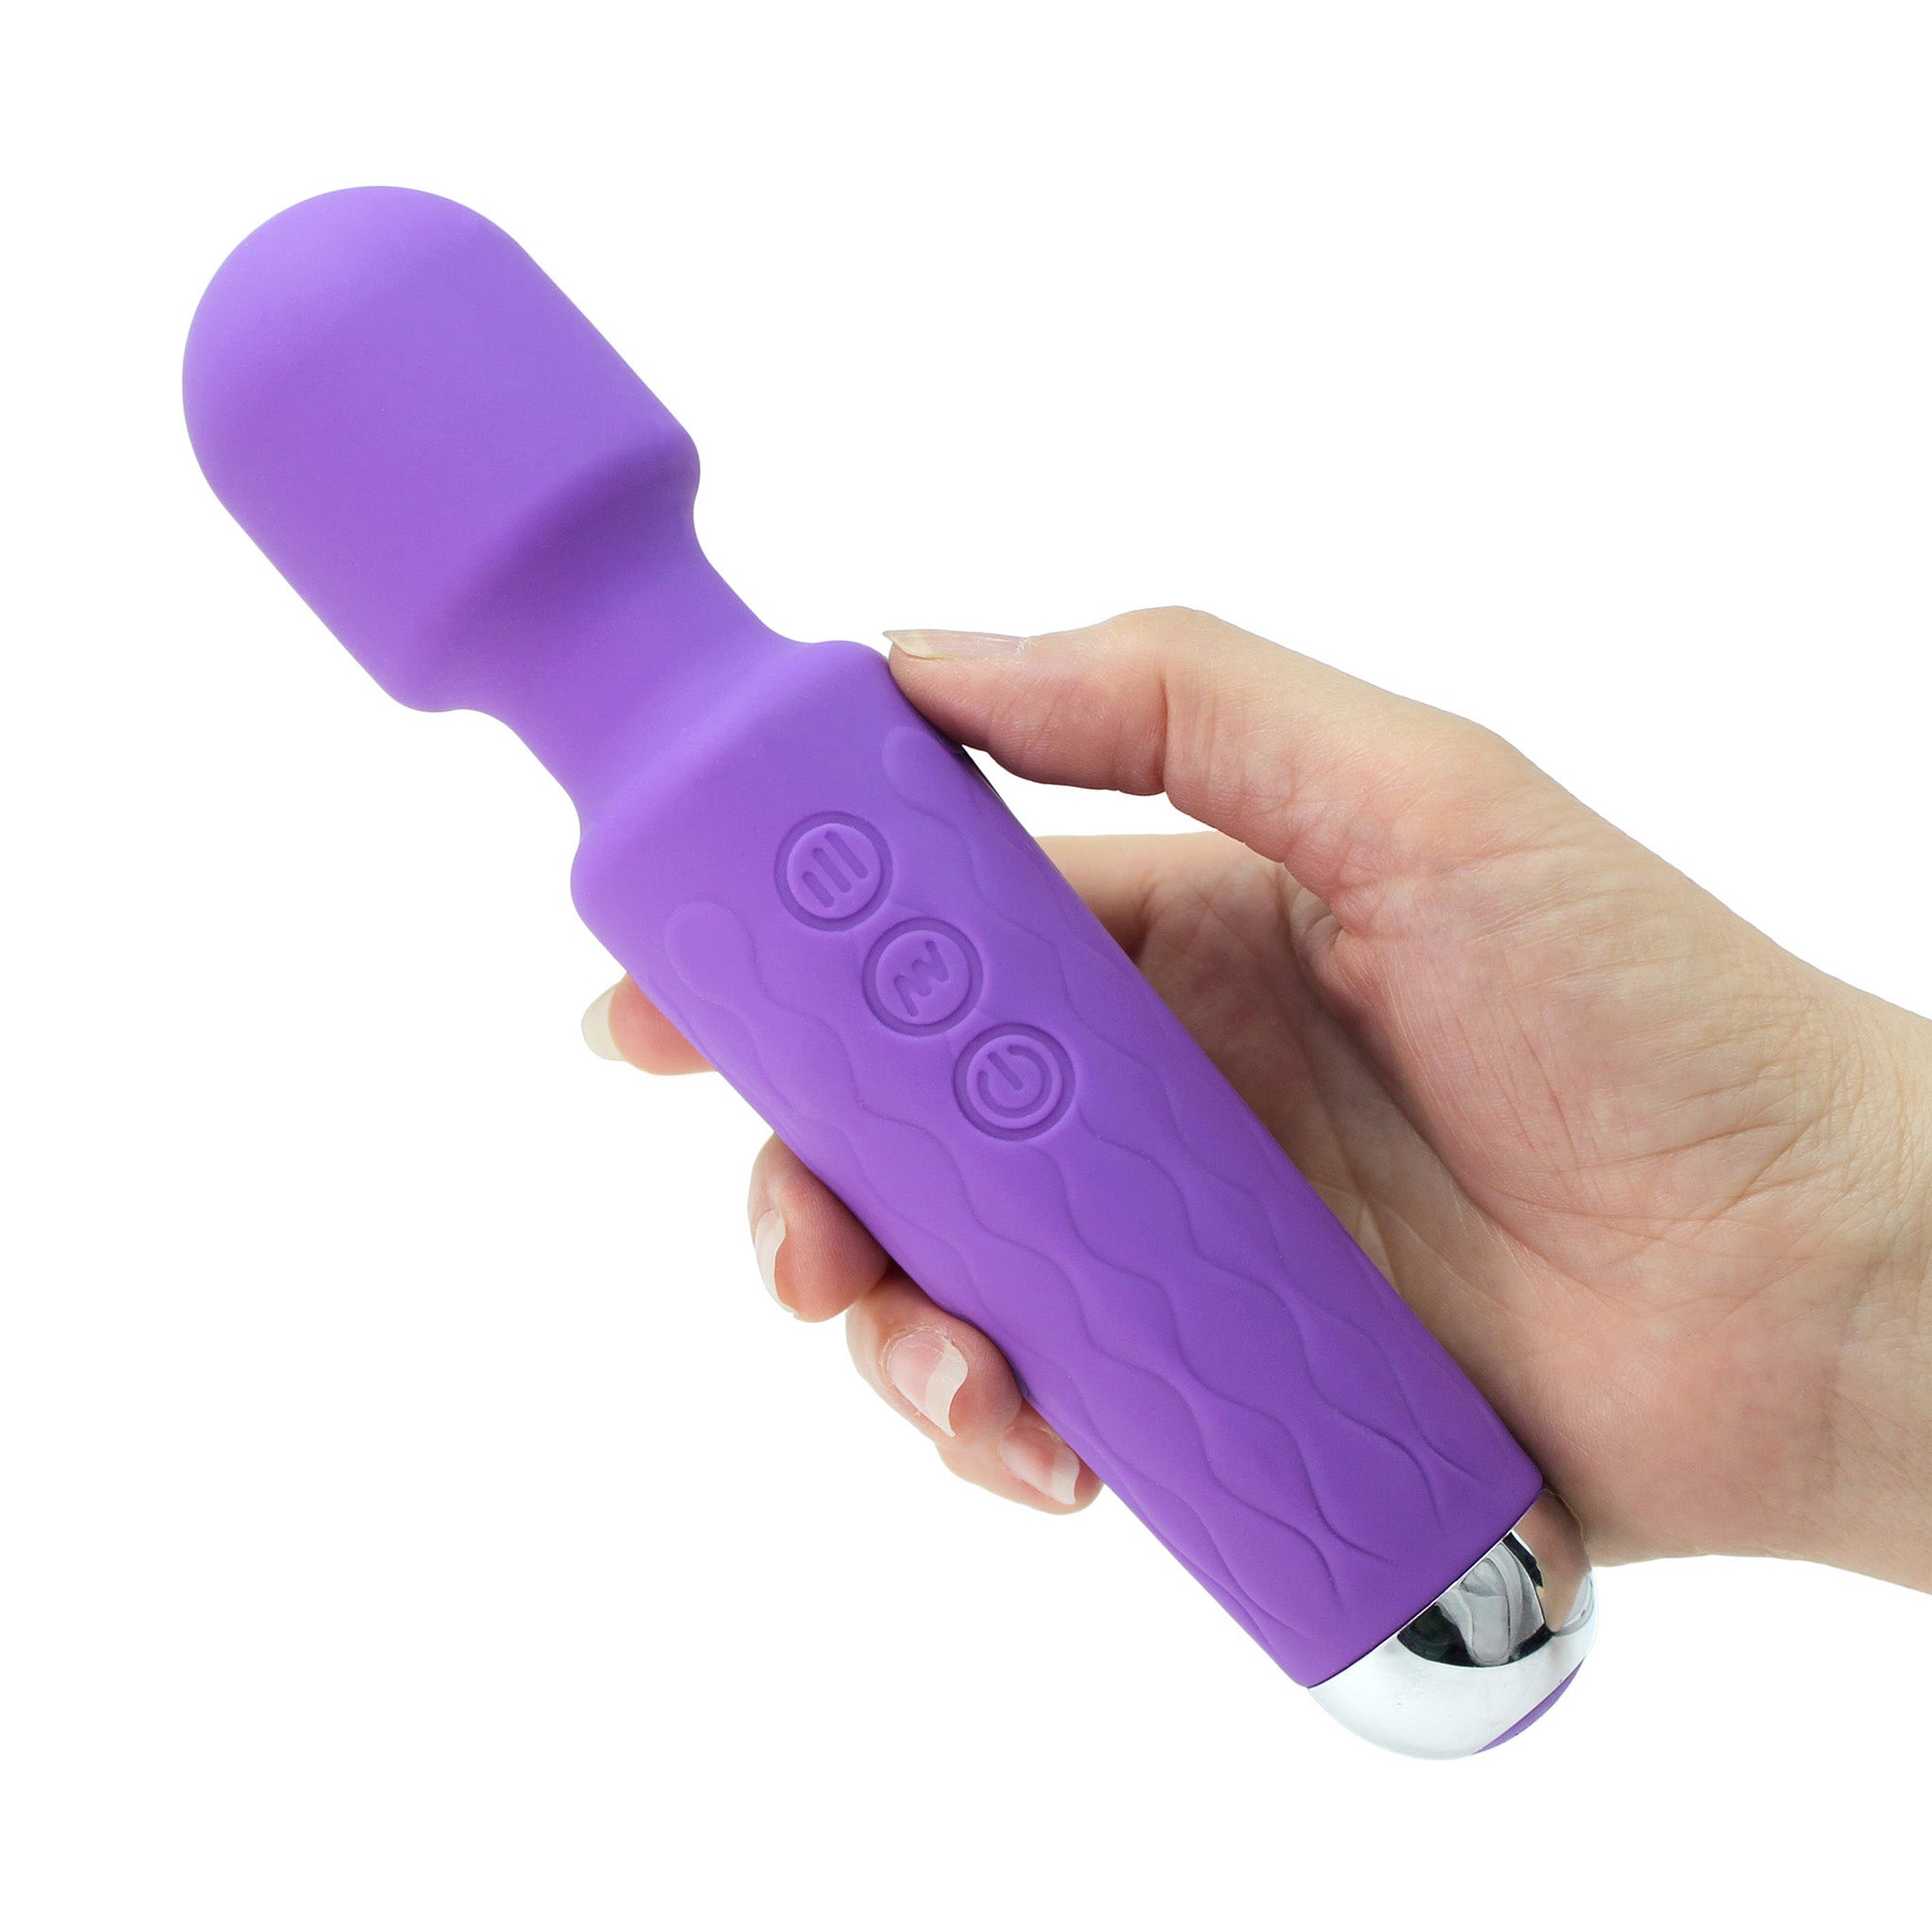 Rechargeable Handheld Wand Massager Vibrator Stimulator Sex Toys for Couples